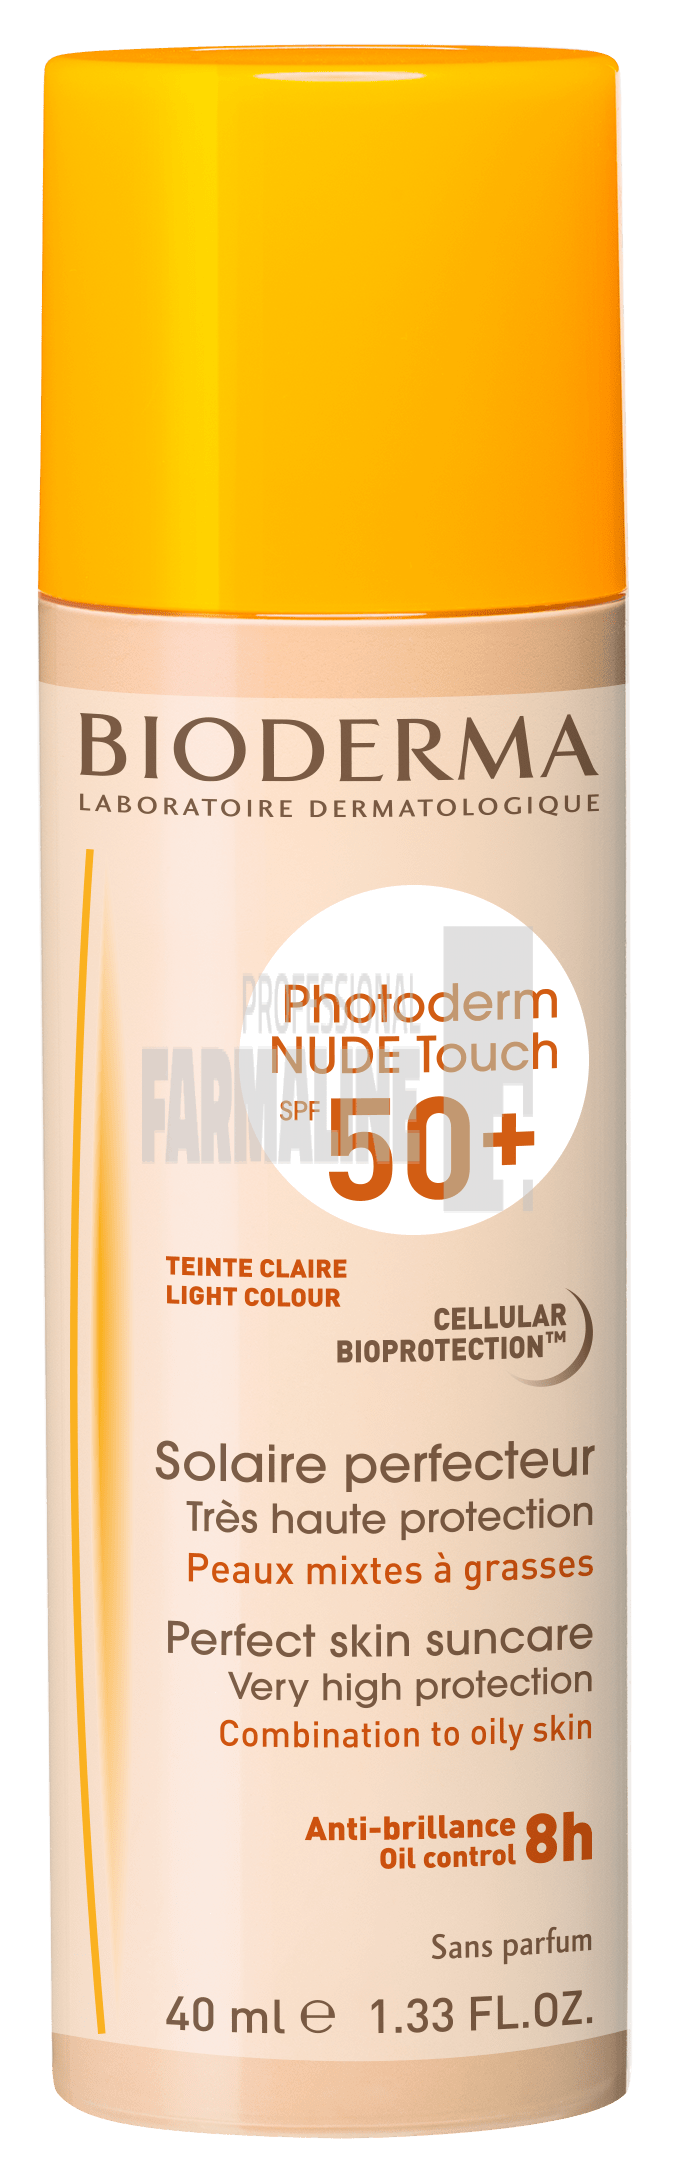 Bioderma Photoderm Nude Touch SPF50+ Claire 40 ml